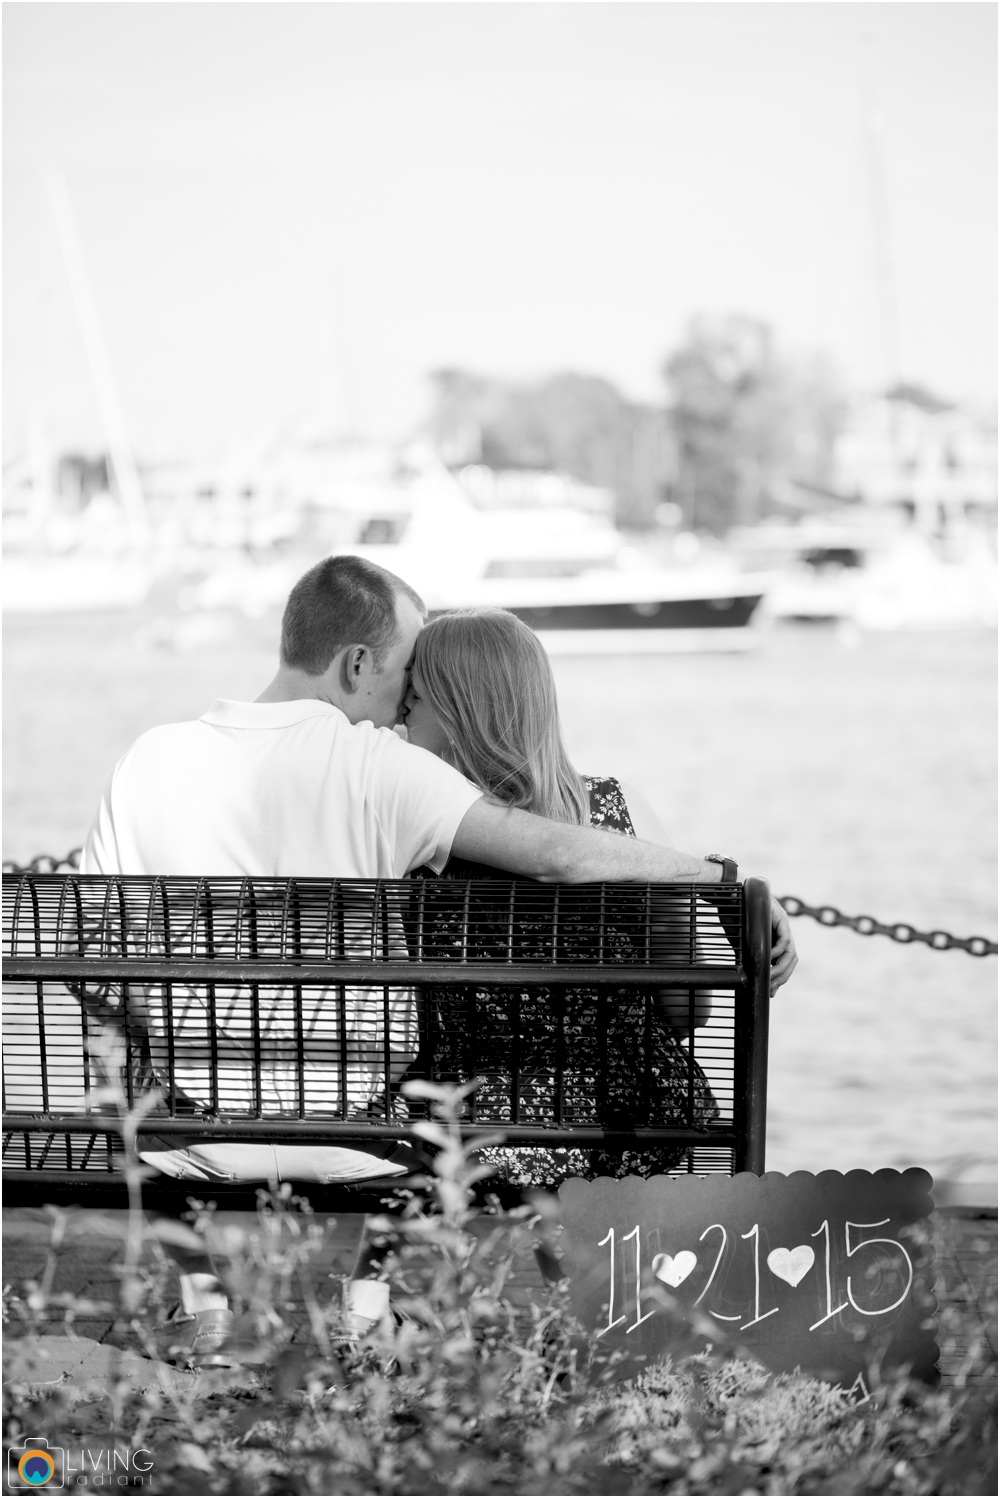 casey-clark-engaged-annapolis-downtown-naval-academy-engagement-session-living-radiant-photography-maggie-patrick-nolan-outdoor-water-boats_0022.jpg